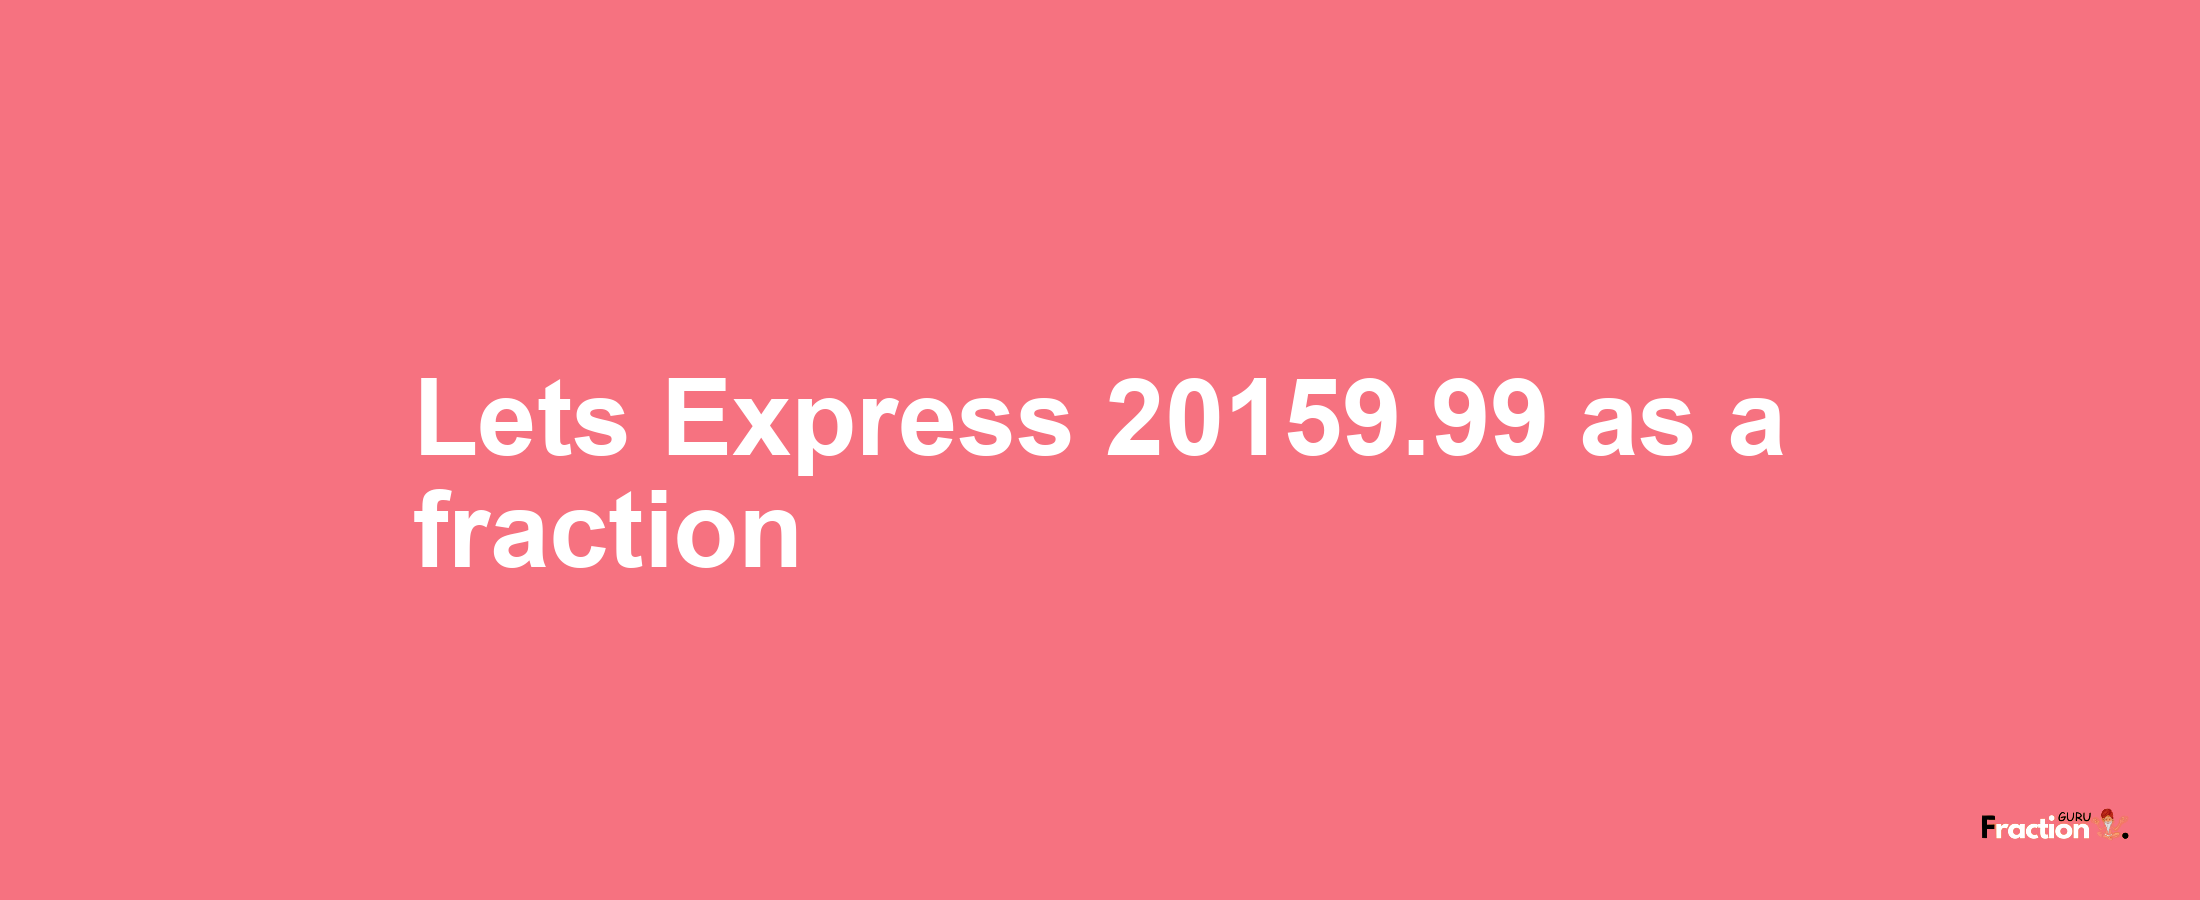 Lets Express 20159.99 as afraction